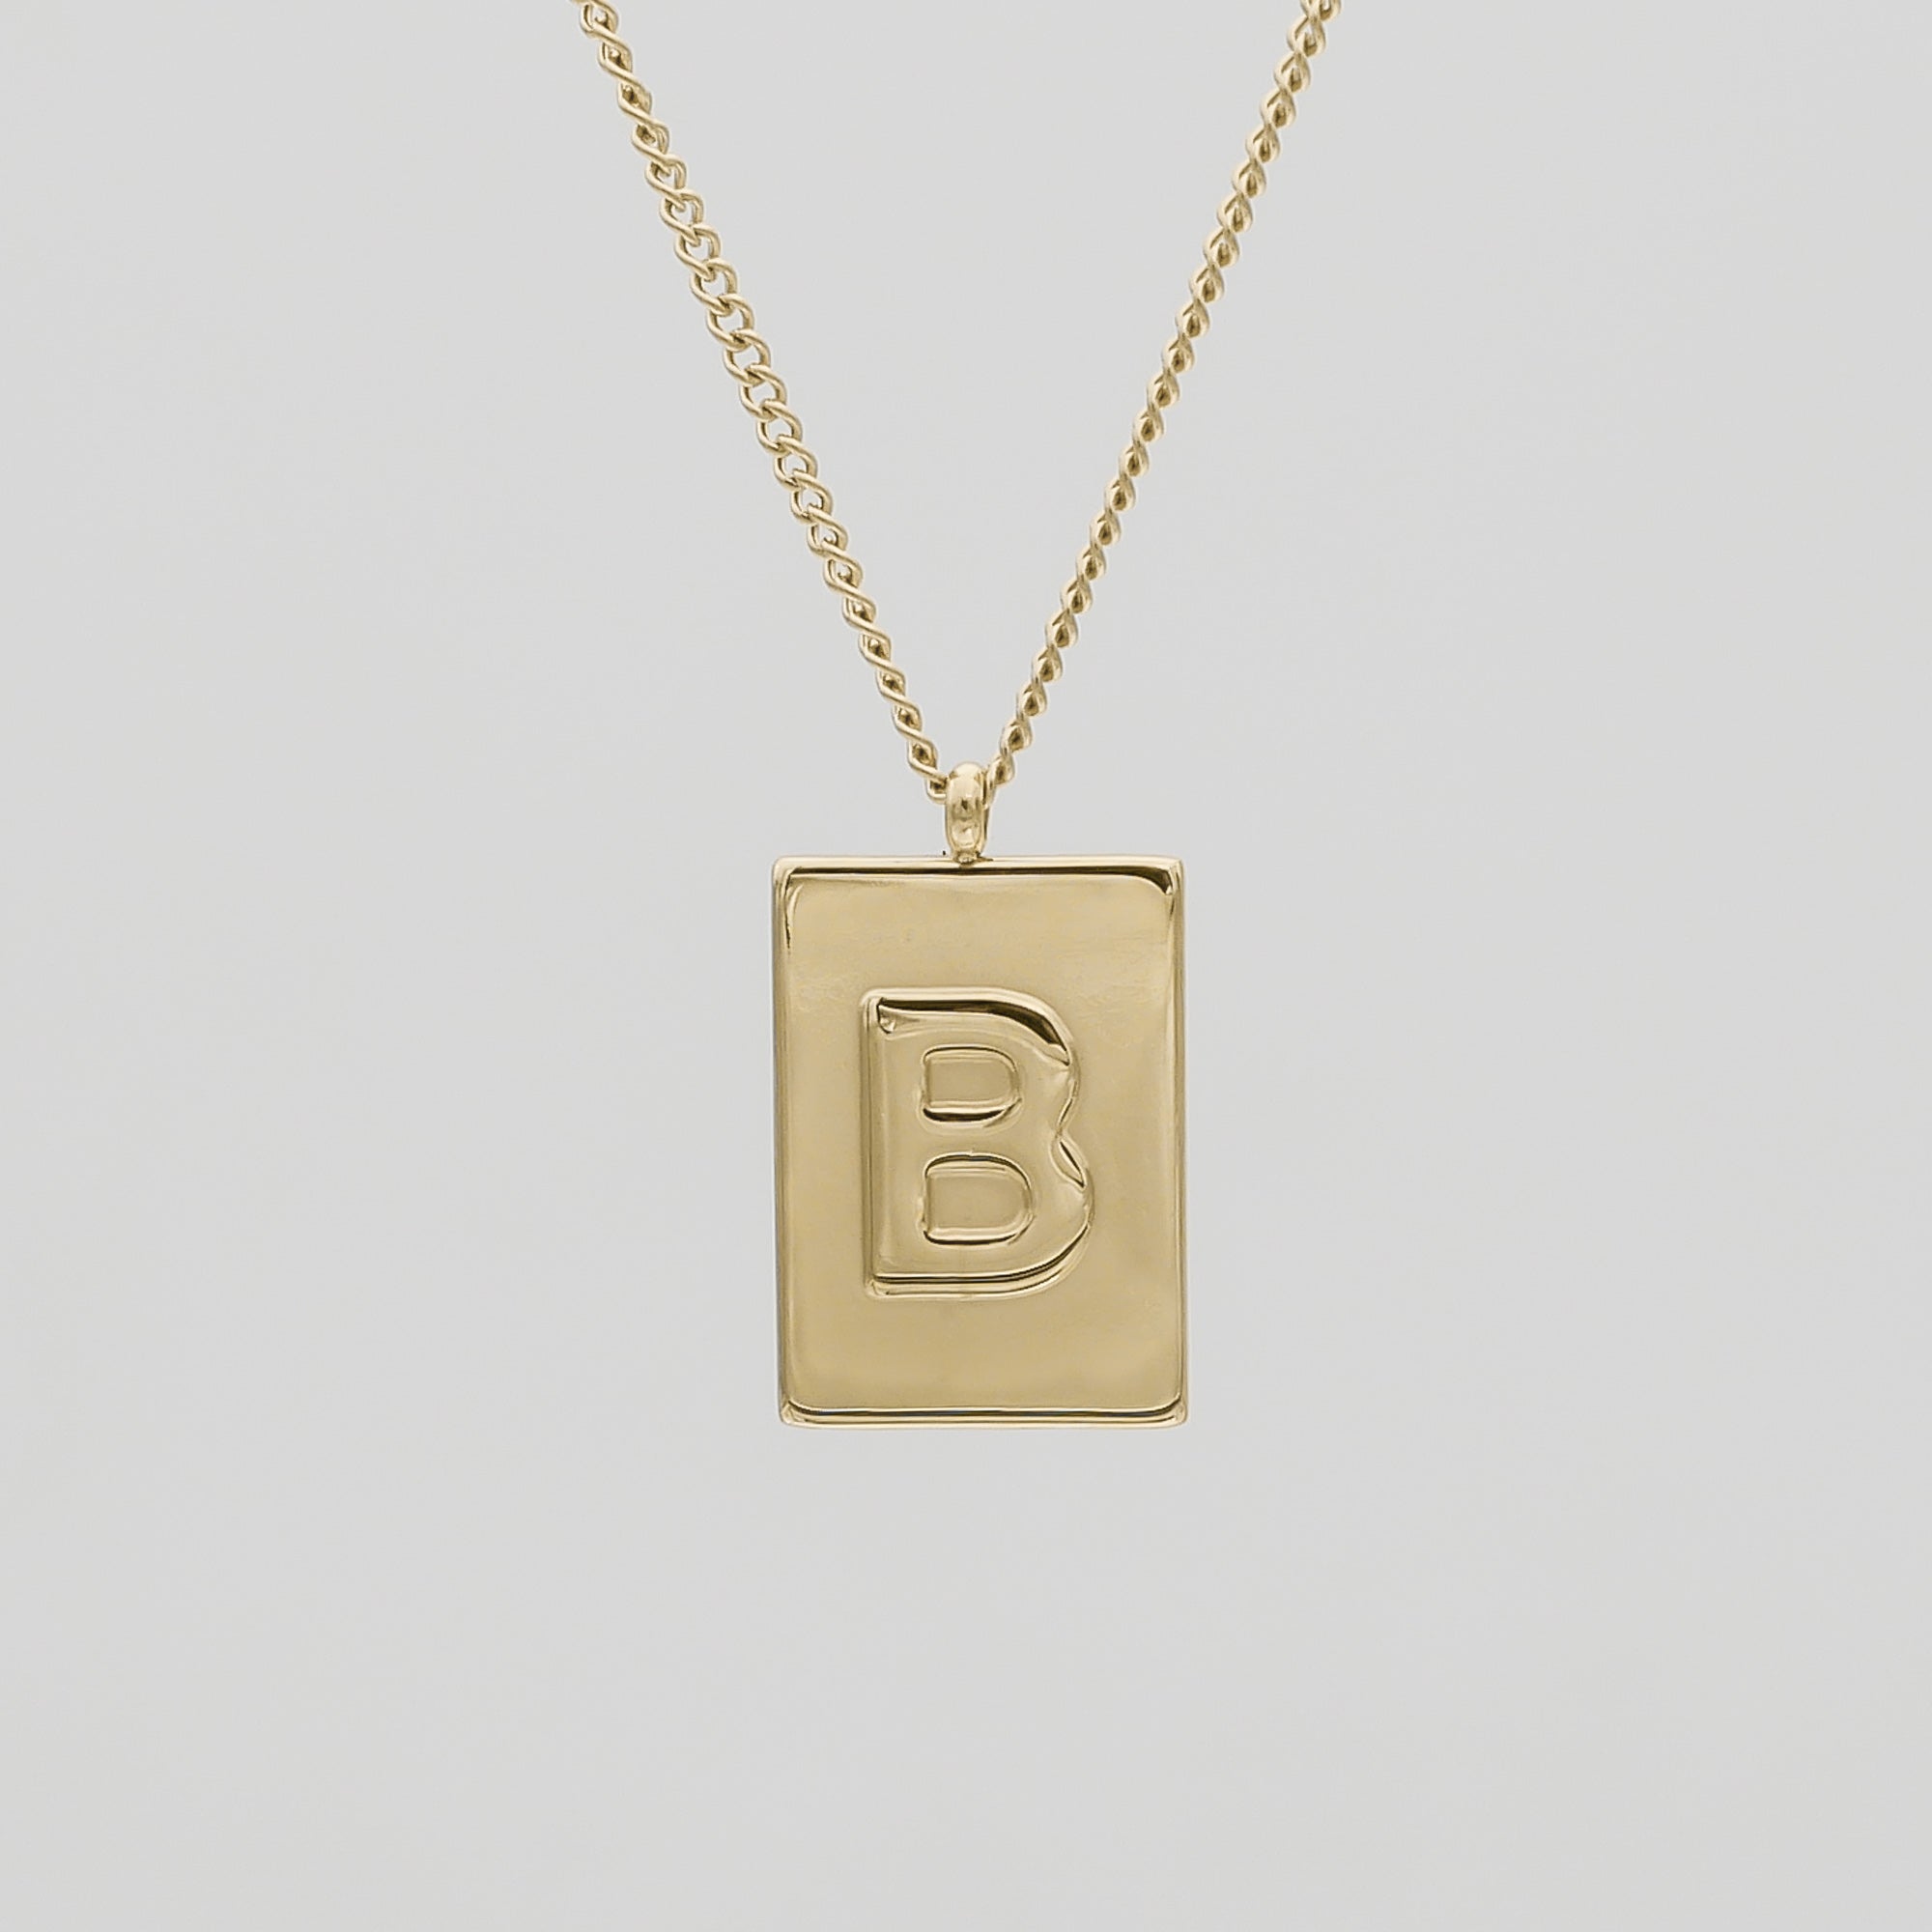 Athena custom initial Gold pendant Necklace, letter B by PRYA